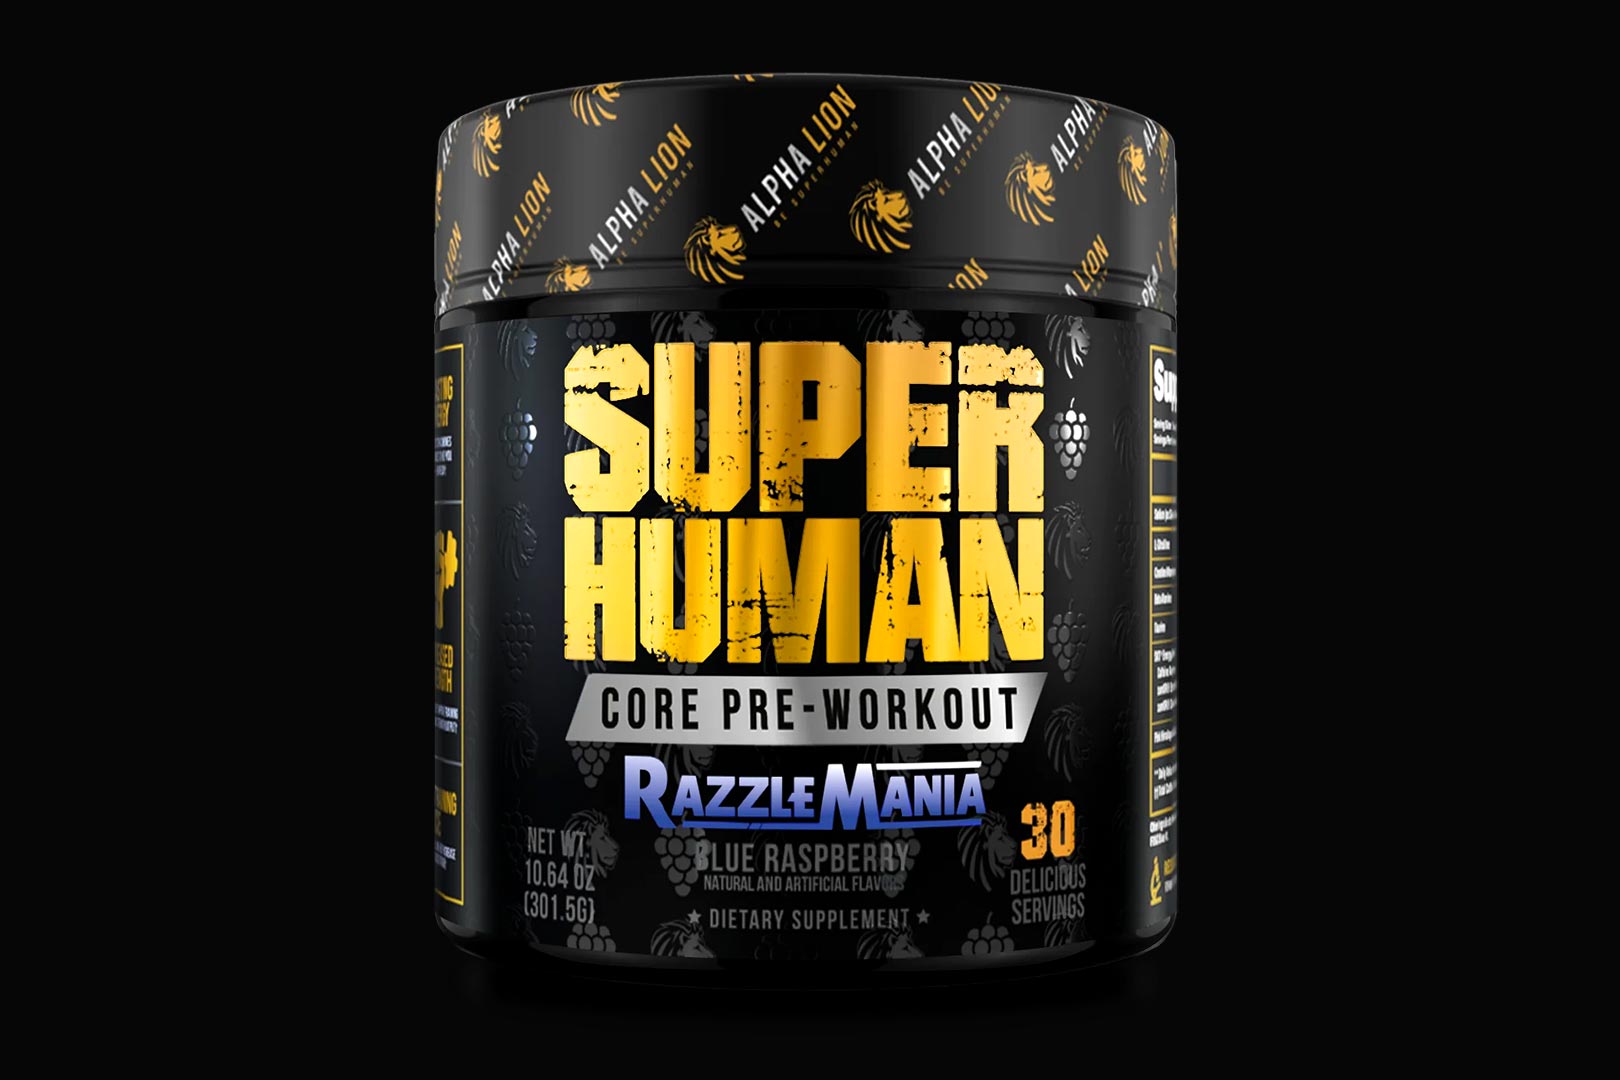 Where to buy Alpha Lion's value Superhuman Core Pre-Workout